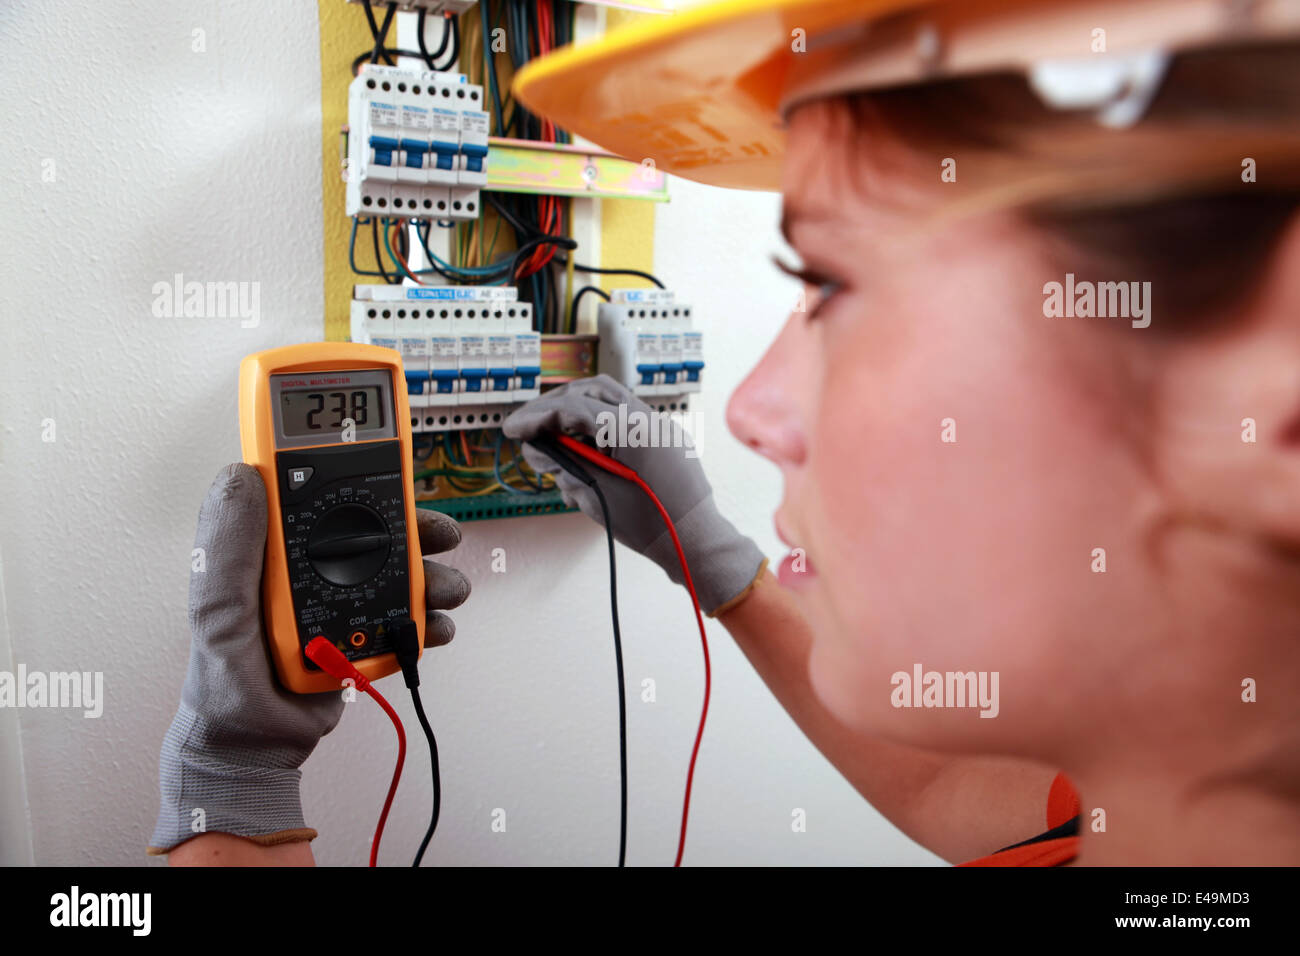 An electrician using a multimeter Stock Photo